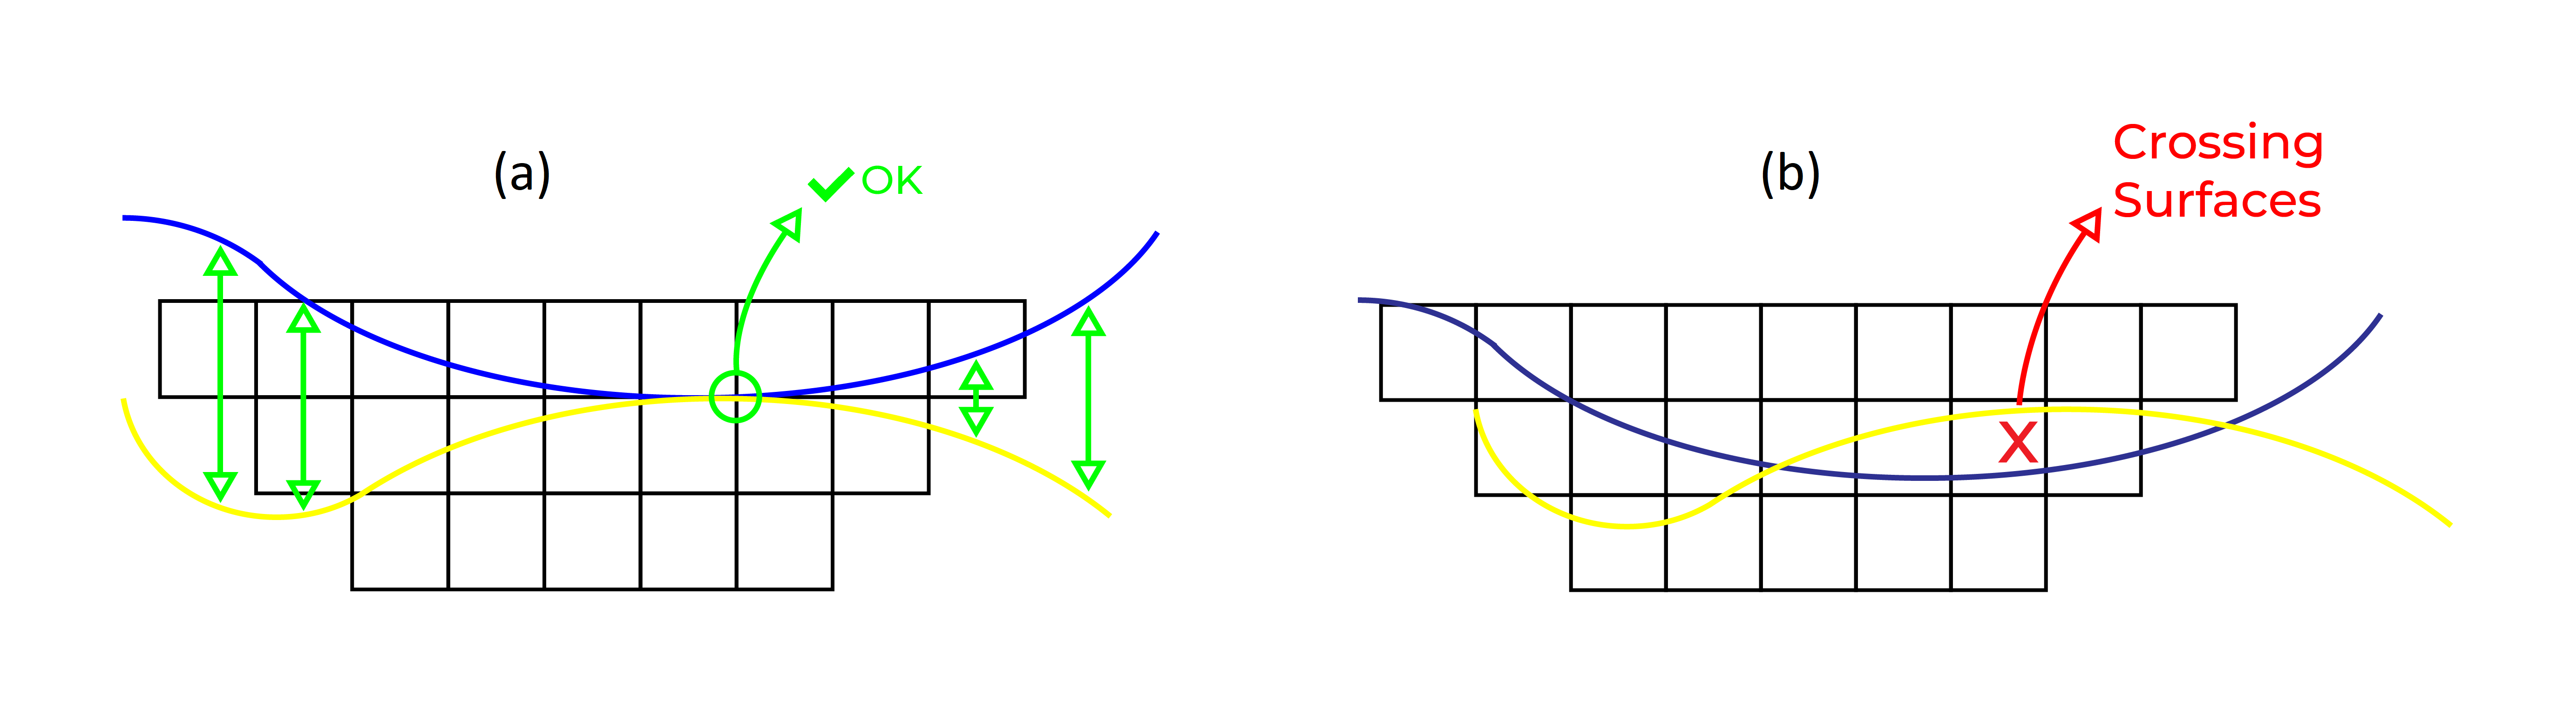 Figure 3: Example of crossing surfaces